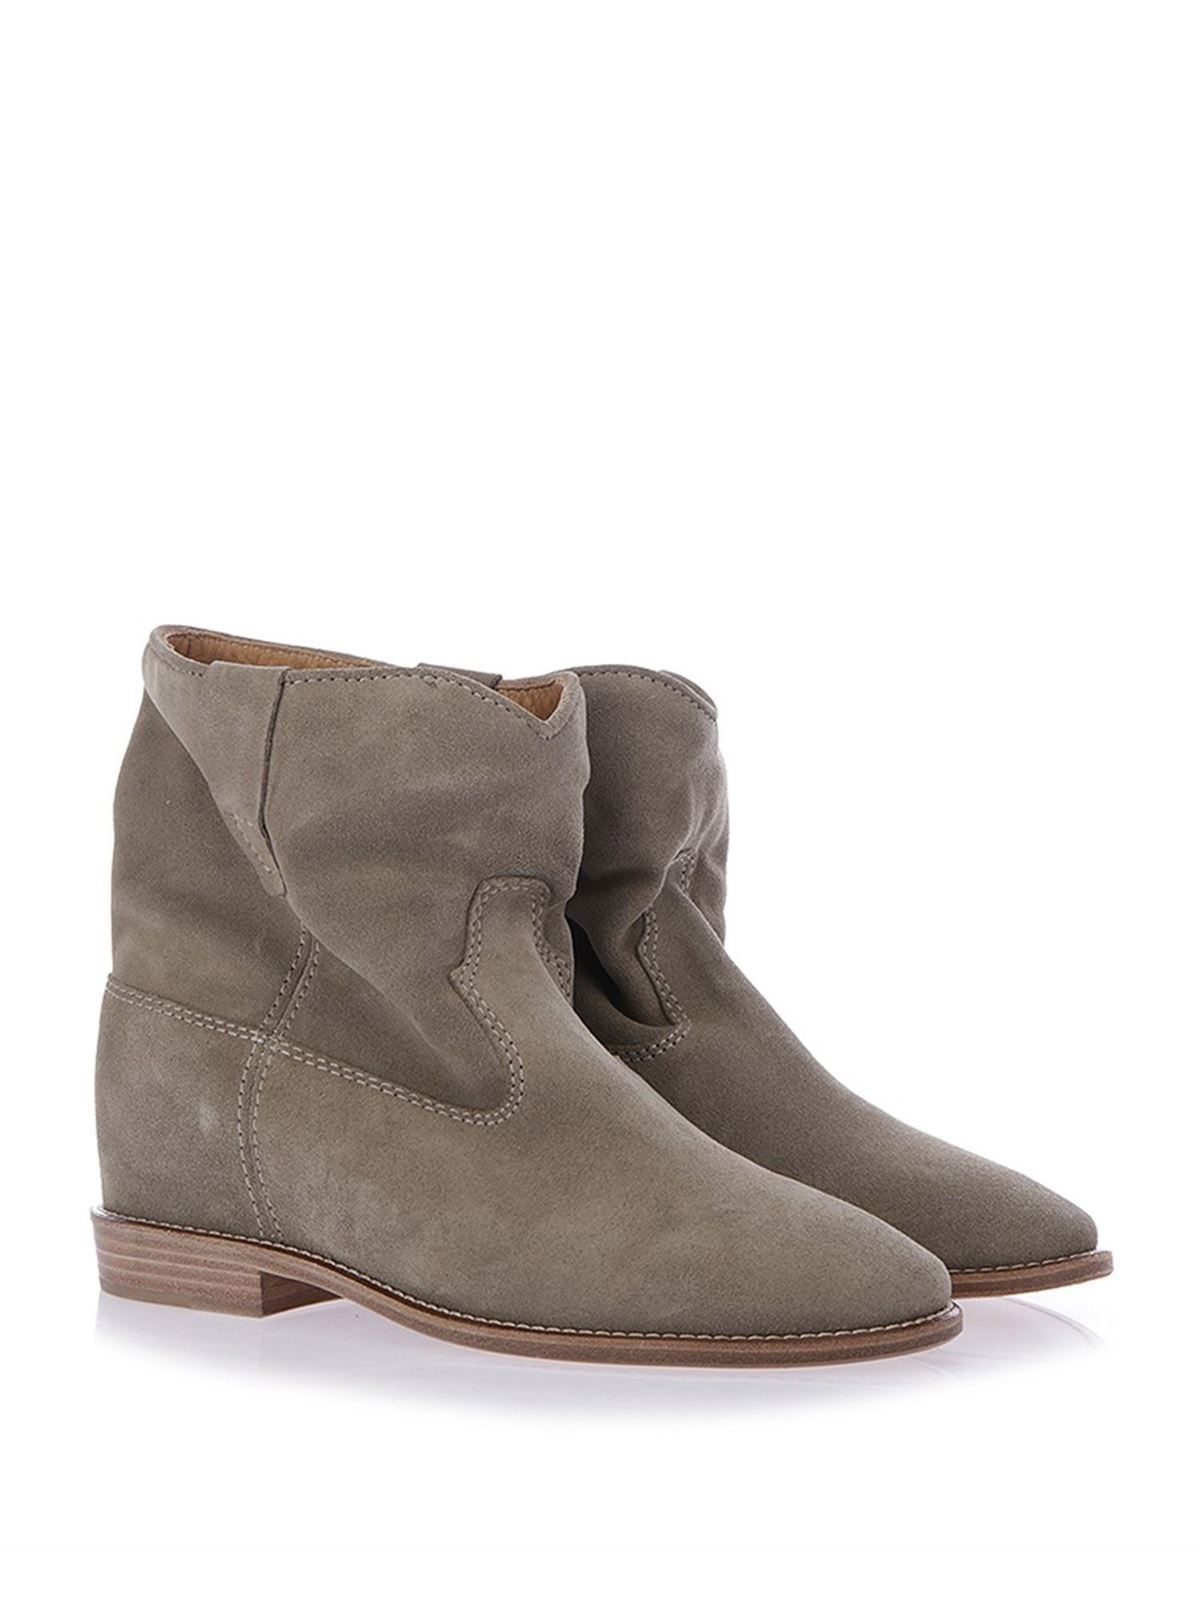 Ankle Isabel Marant - Crisi ankle boots in - BO010300M103STAUPE